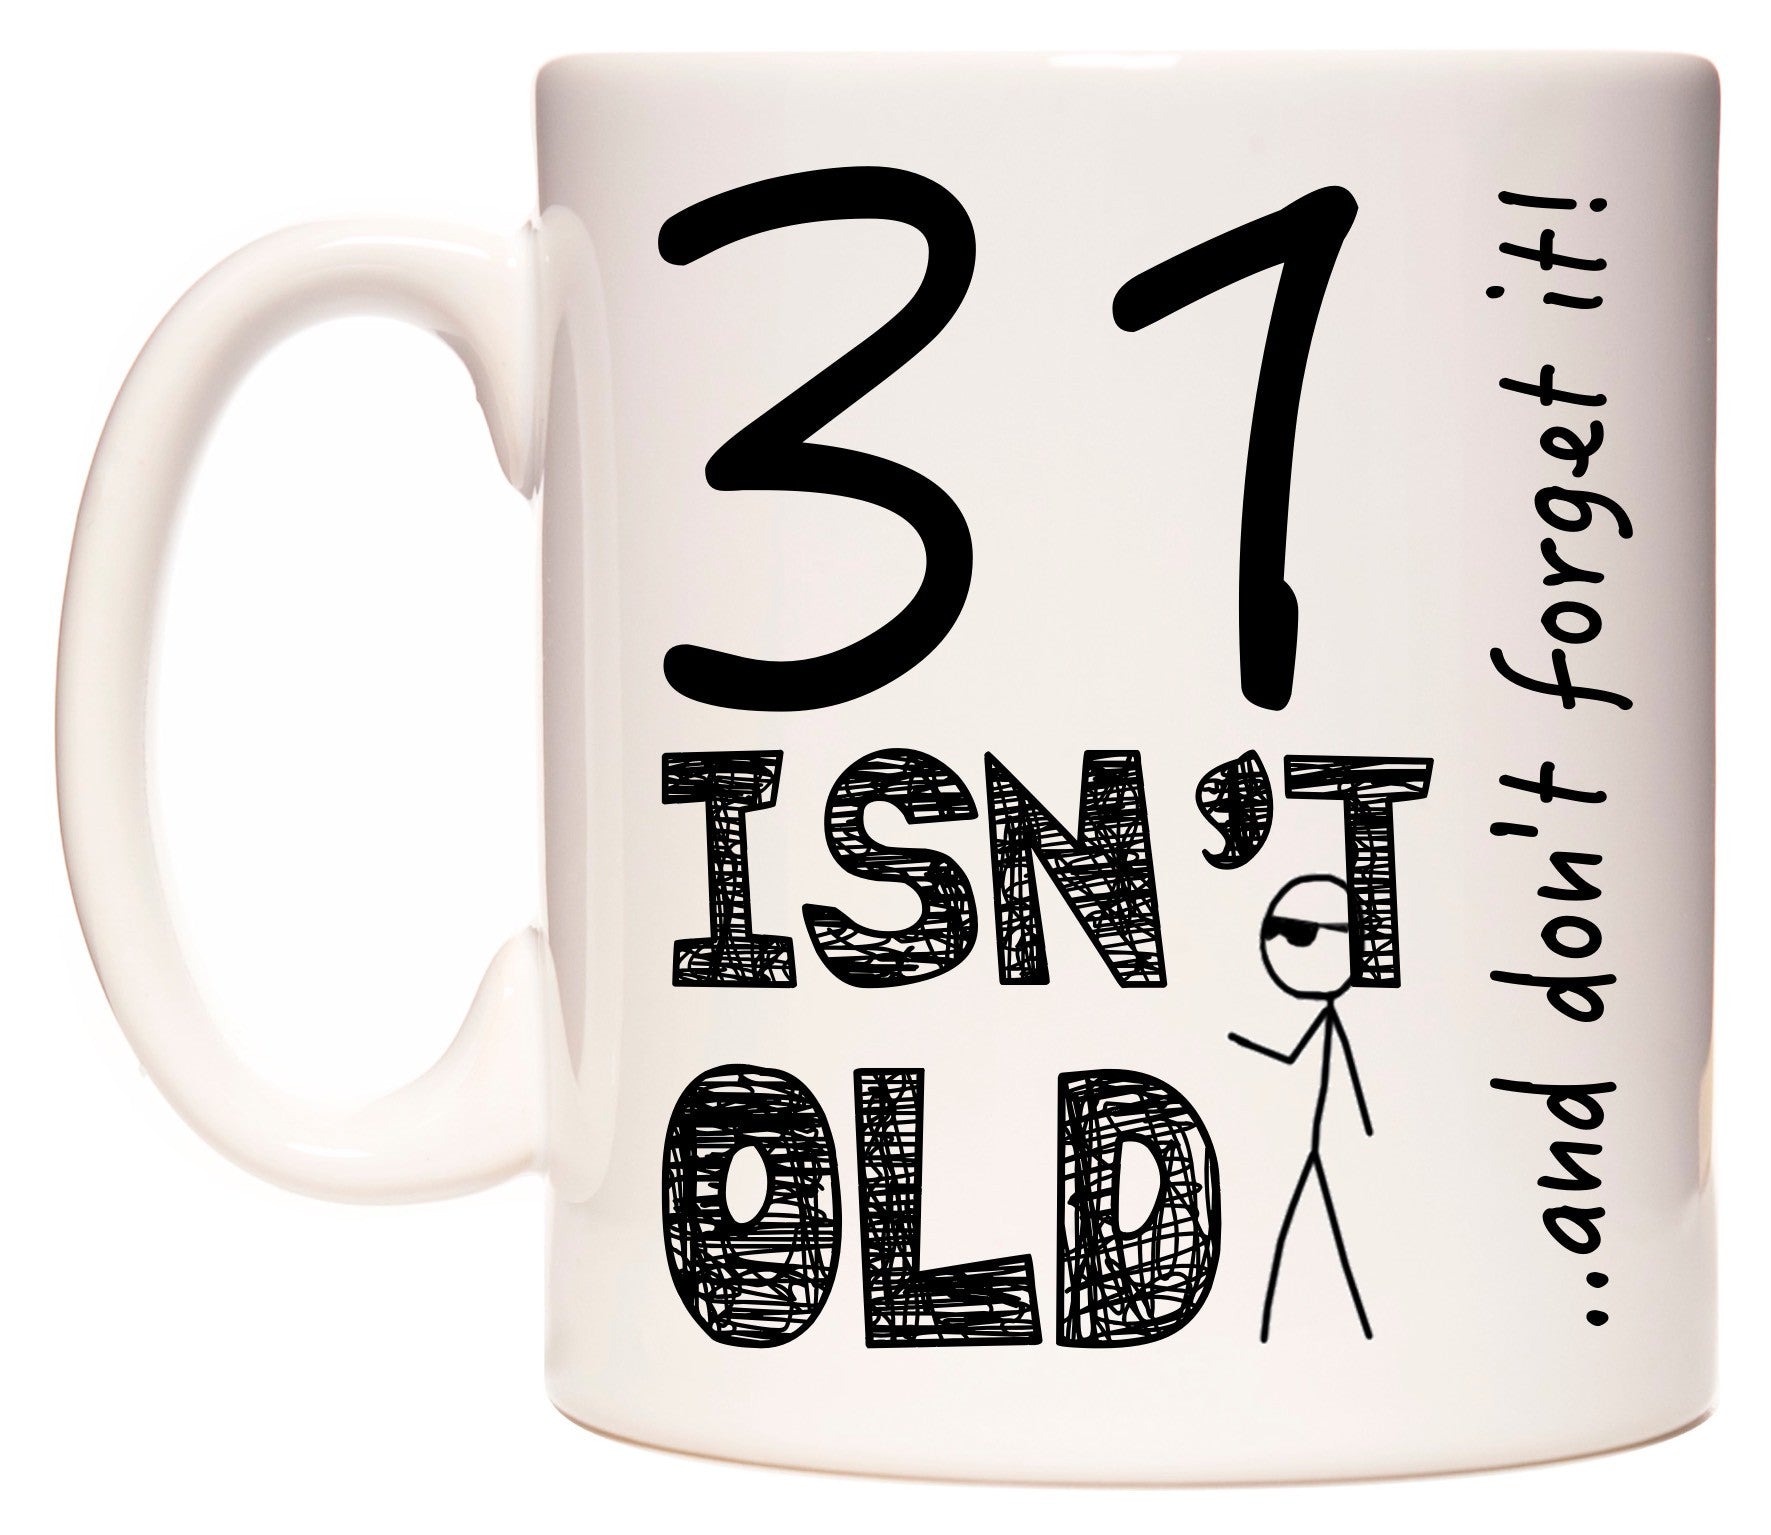 This mug features 31 Isn't Old